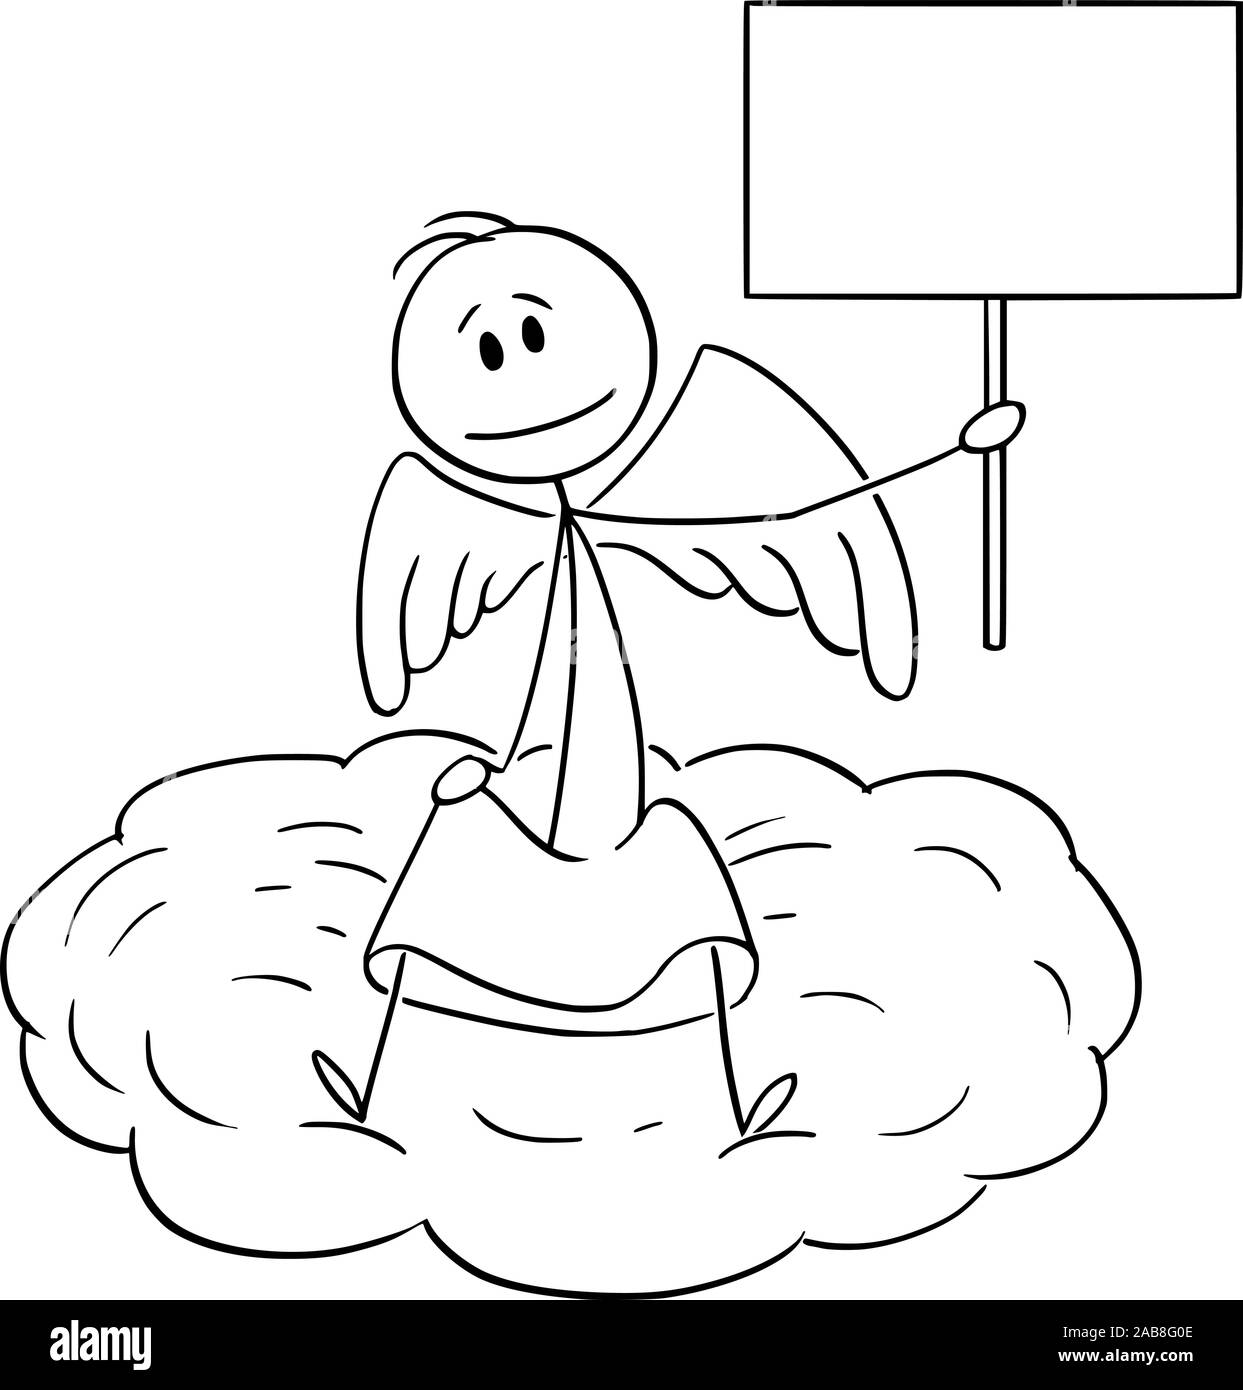 Vector cartoon stick figure drawing conceptual illustration of man sitting on cloud and holding empty sign. Stock Vector